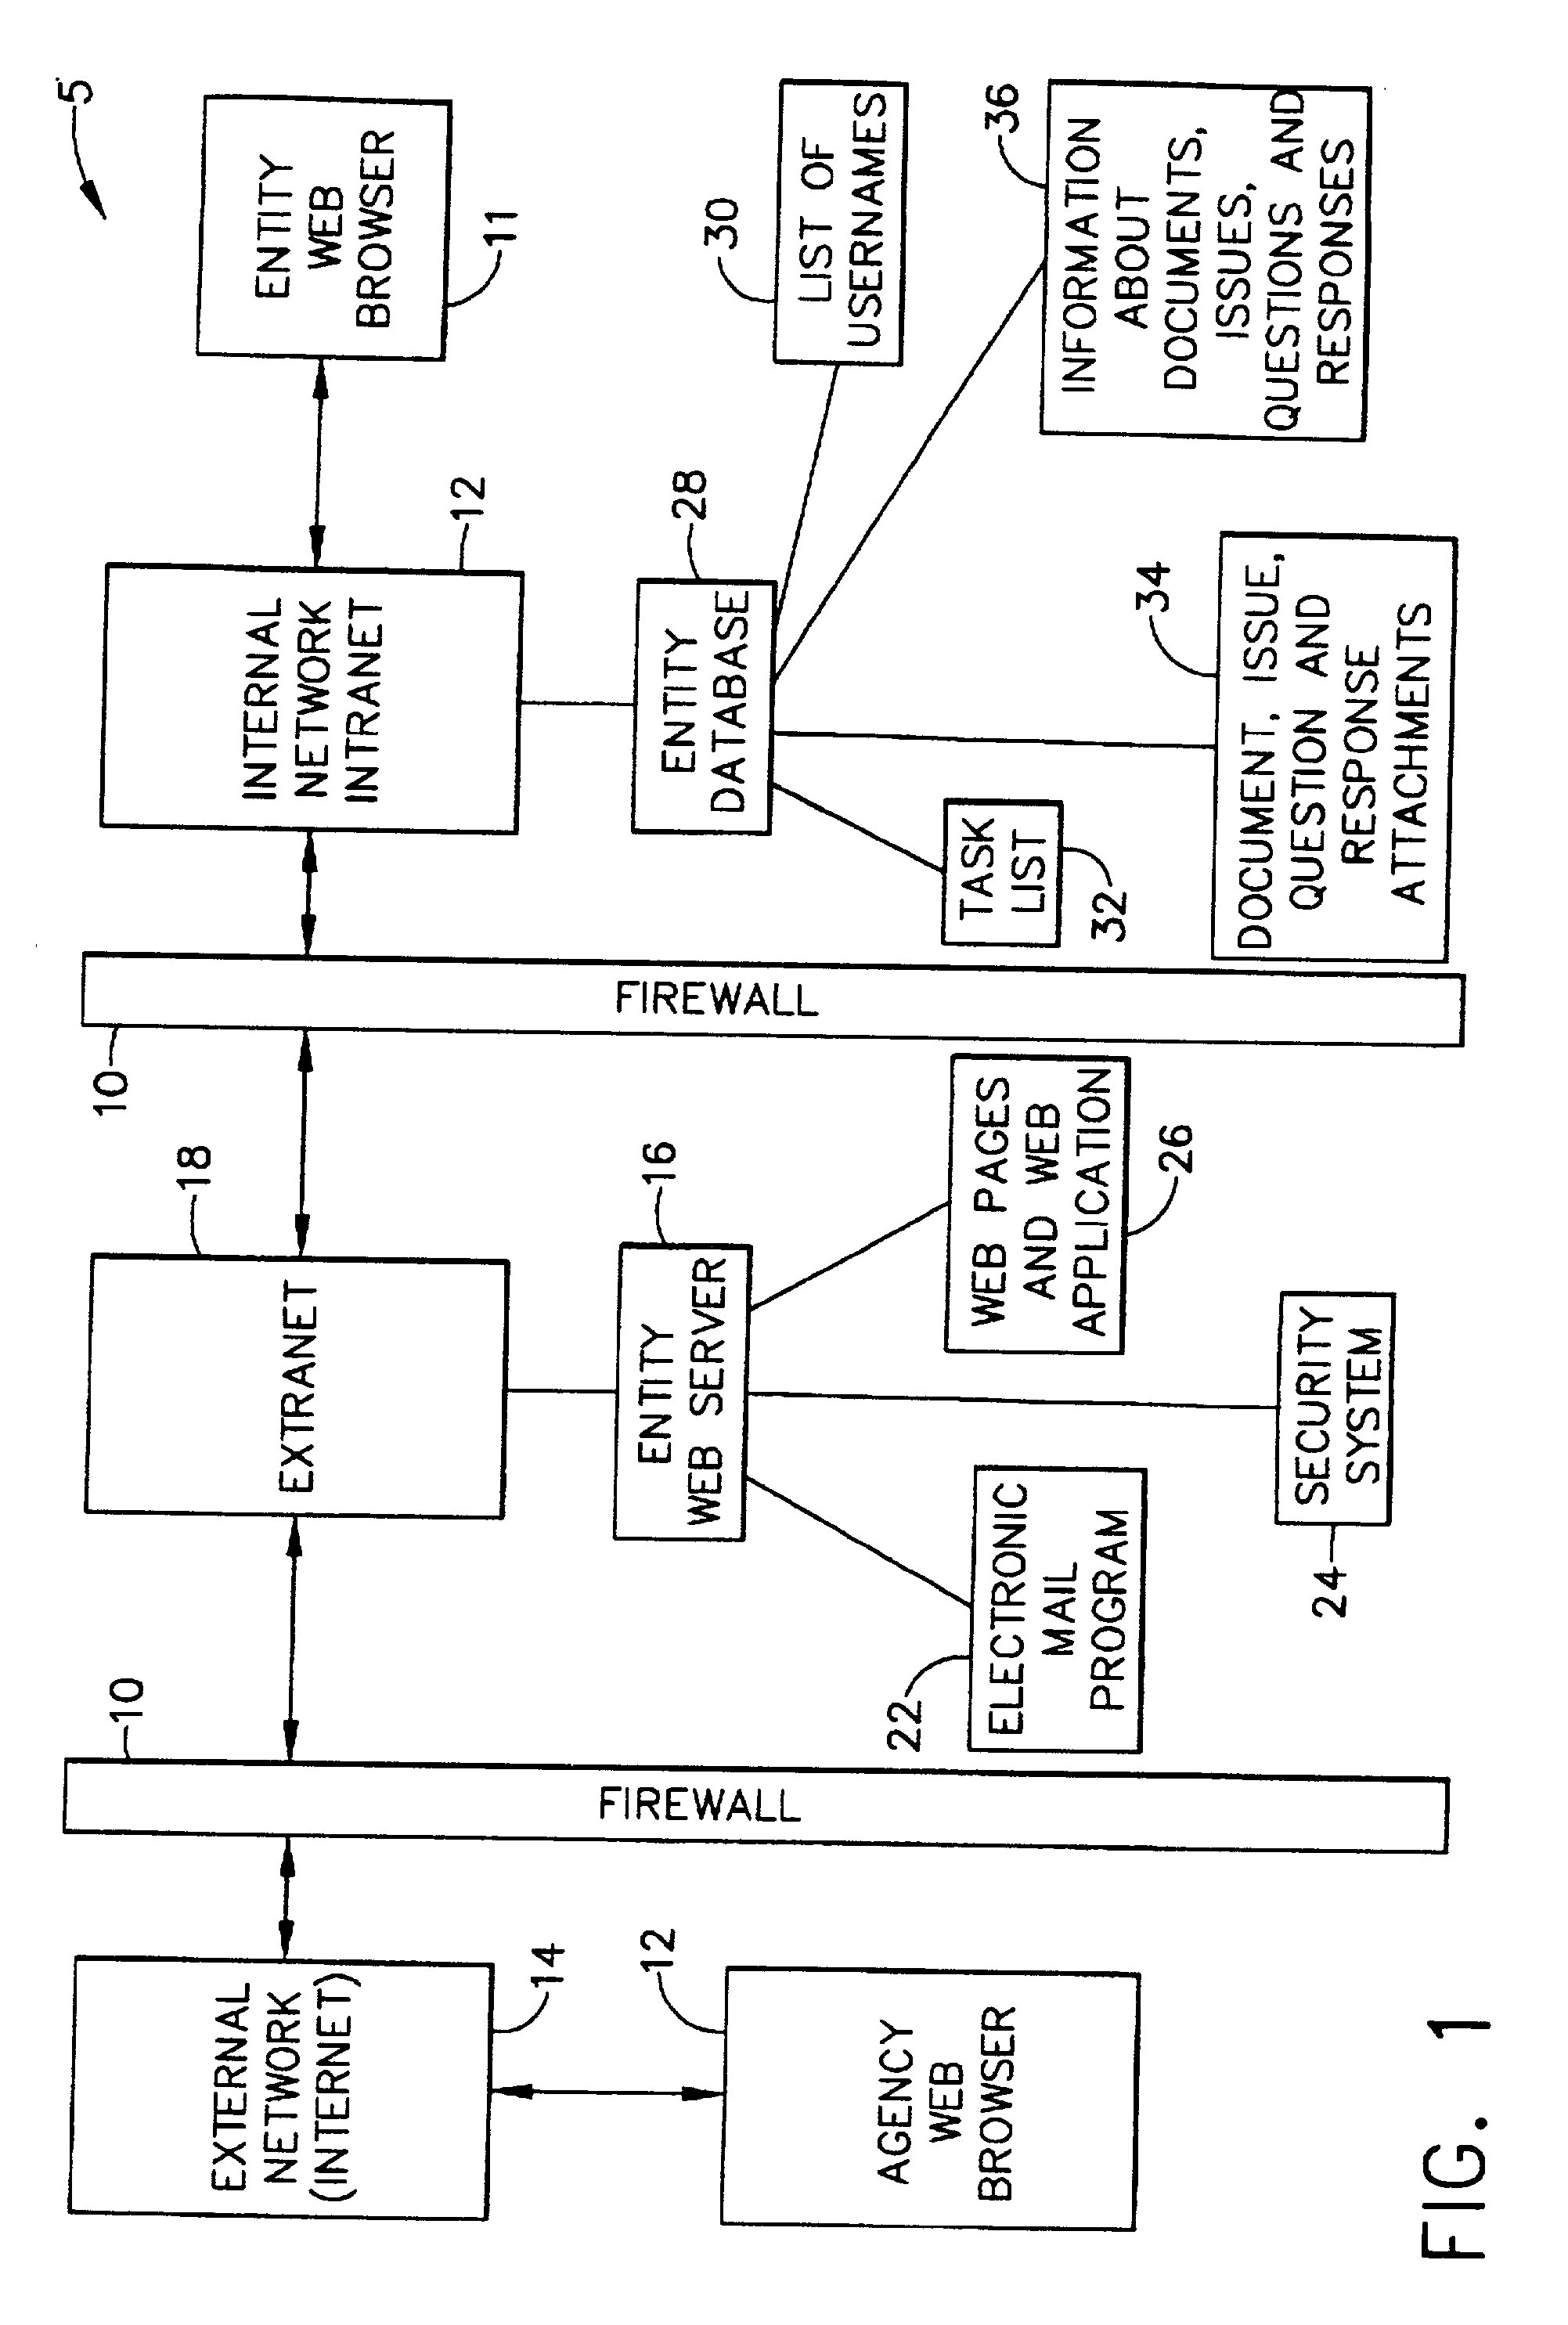 System and method for collaboration between regulatory agency and regulated entity